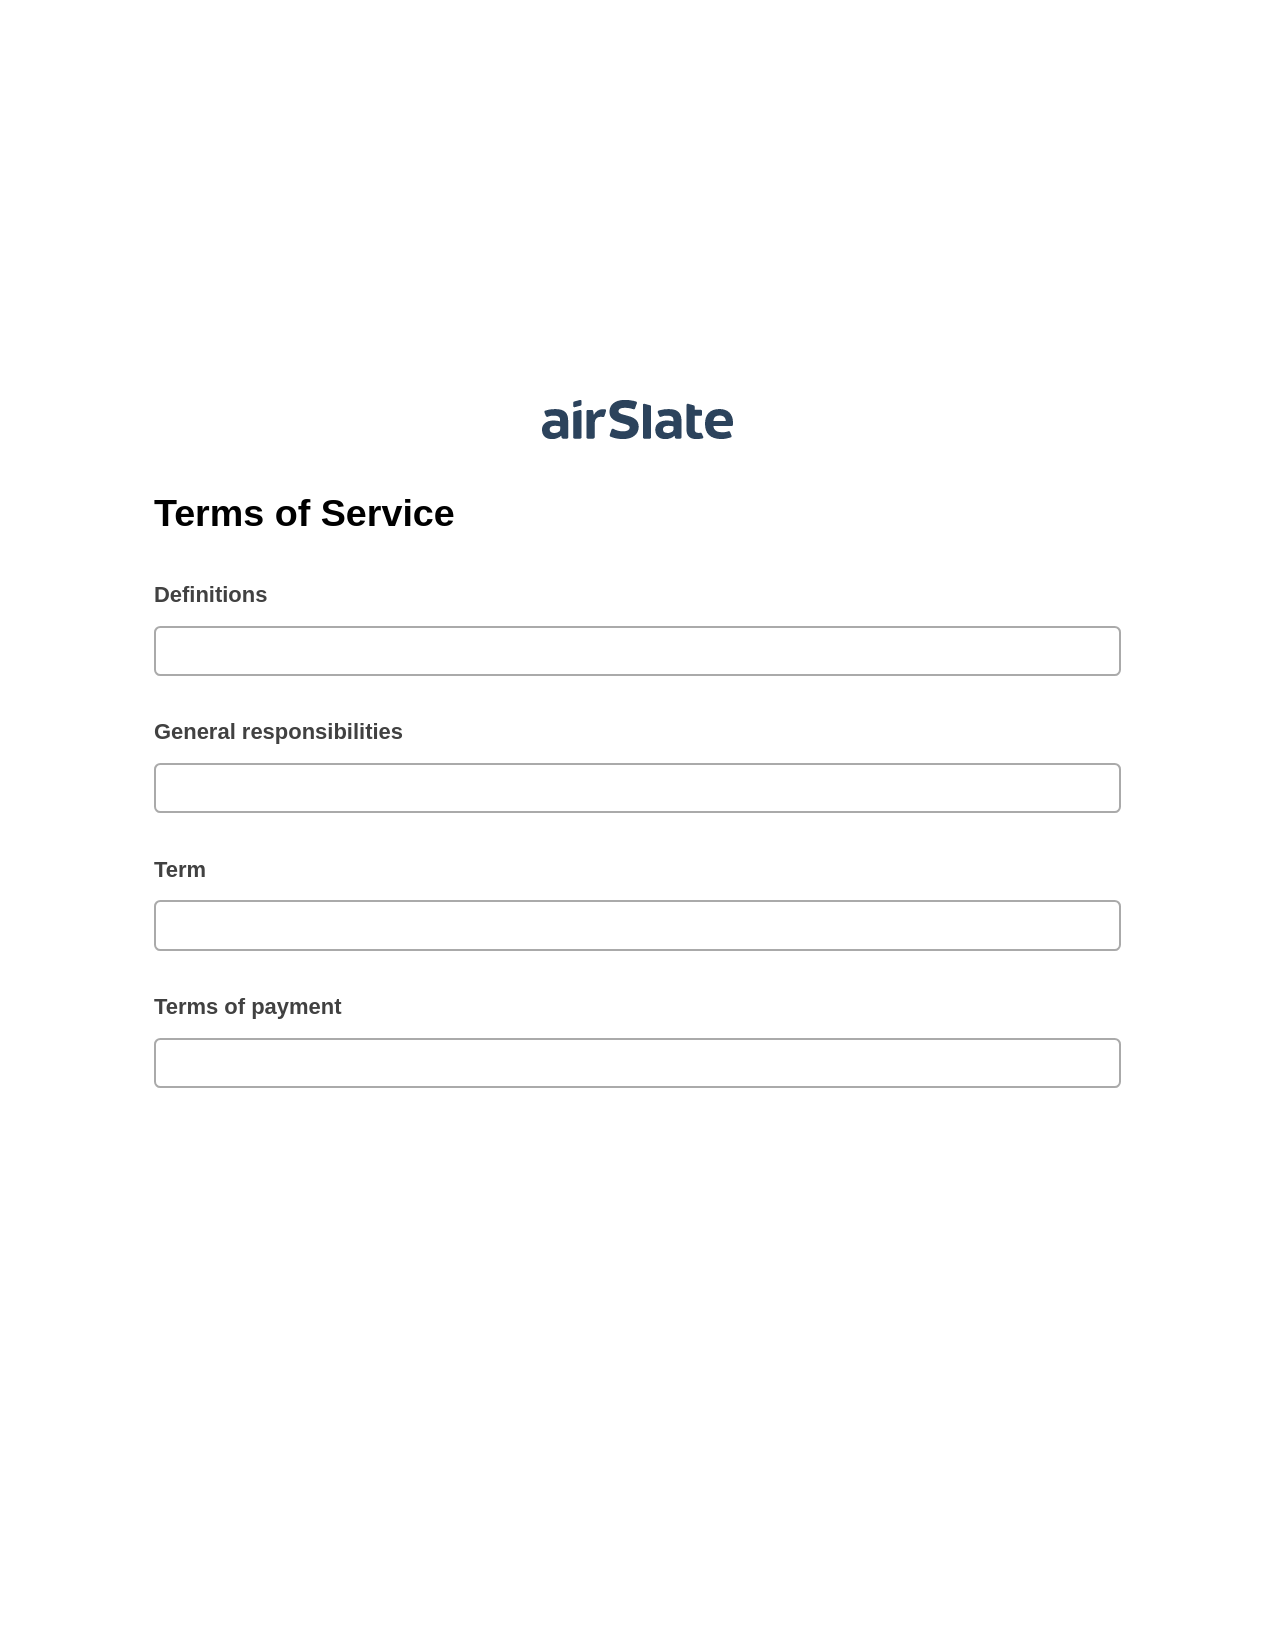 Multirole Terms of Service Pre-fill from Salesforce Records with SOQL Bot, Webhook Bot, OneDrive Bot